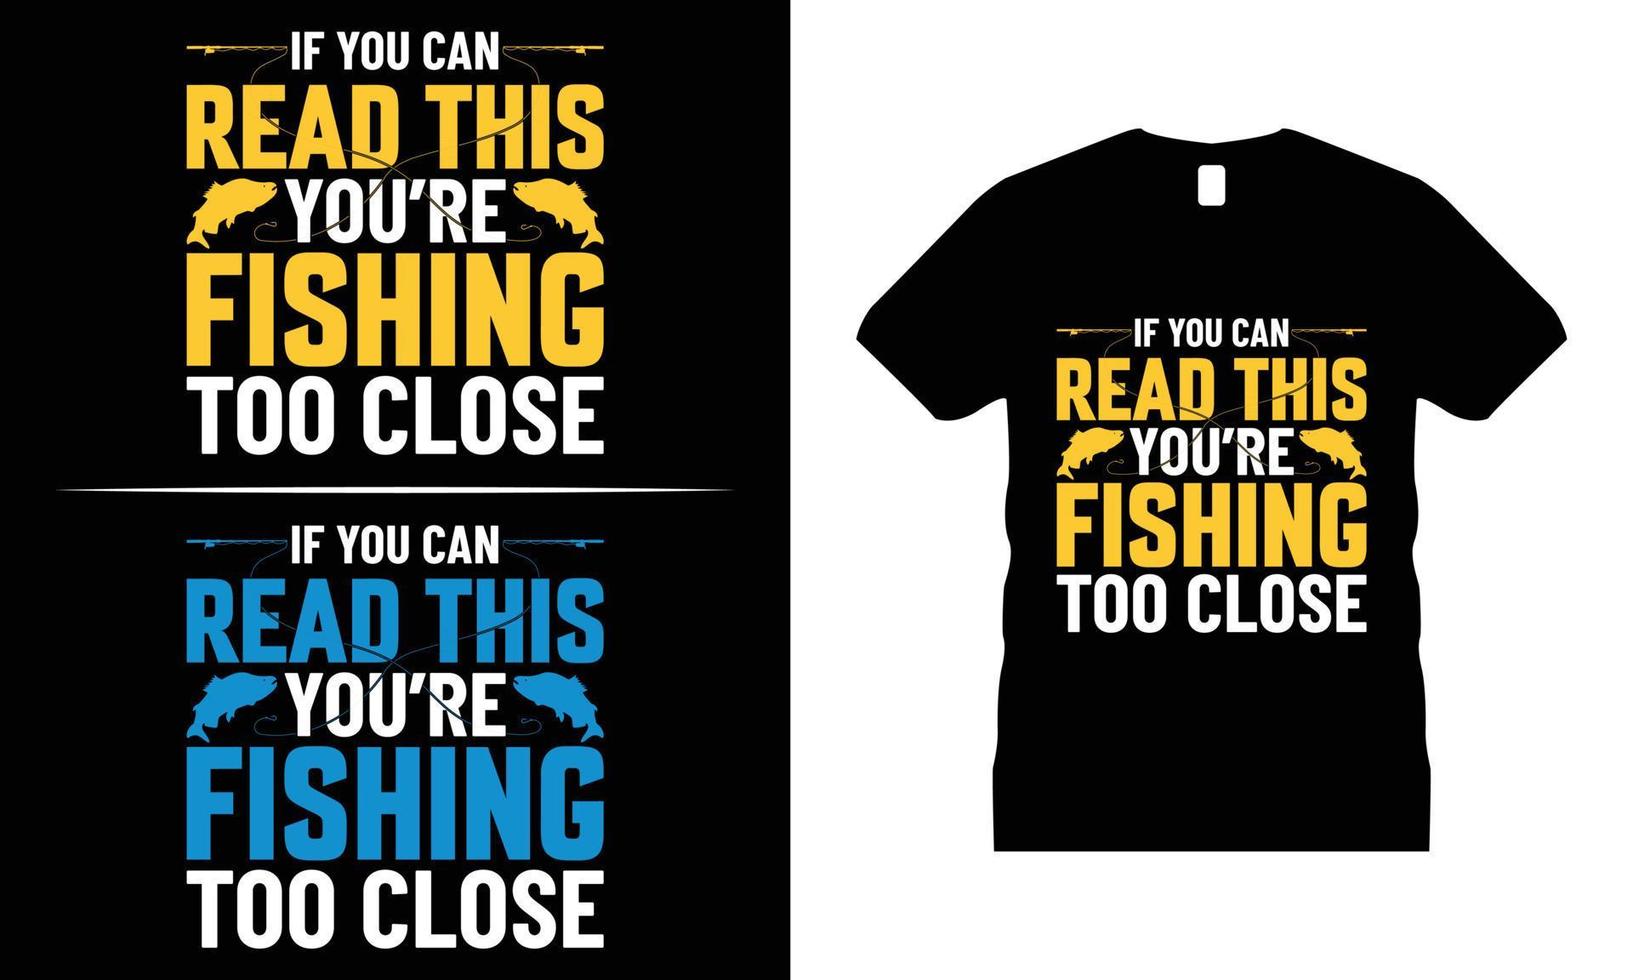 Fishing Lover T-shirt Design vector. Use for T-Shirt, mugs, stickers, etc. vector